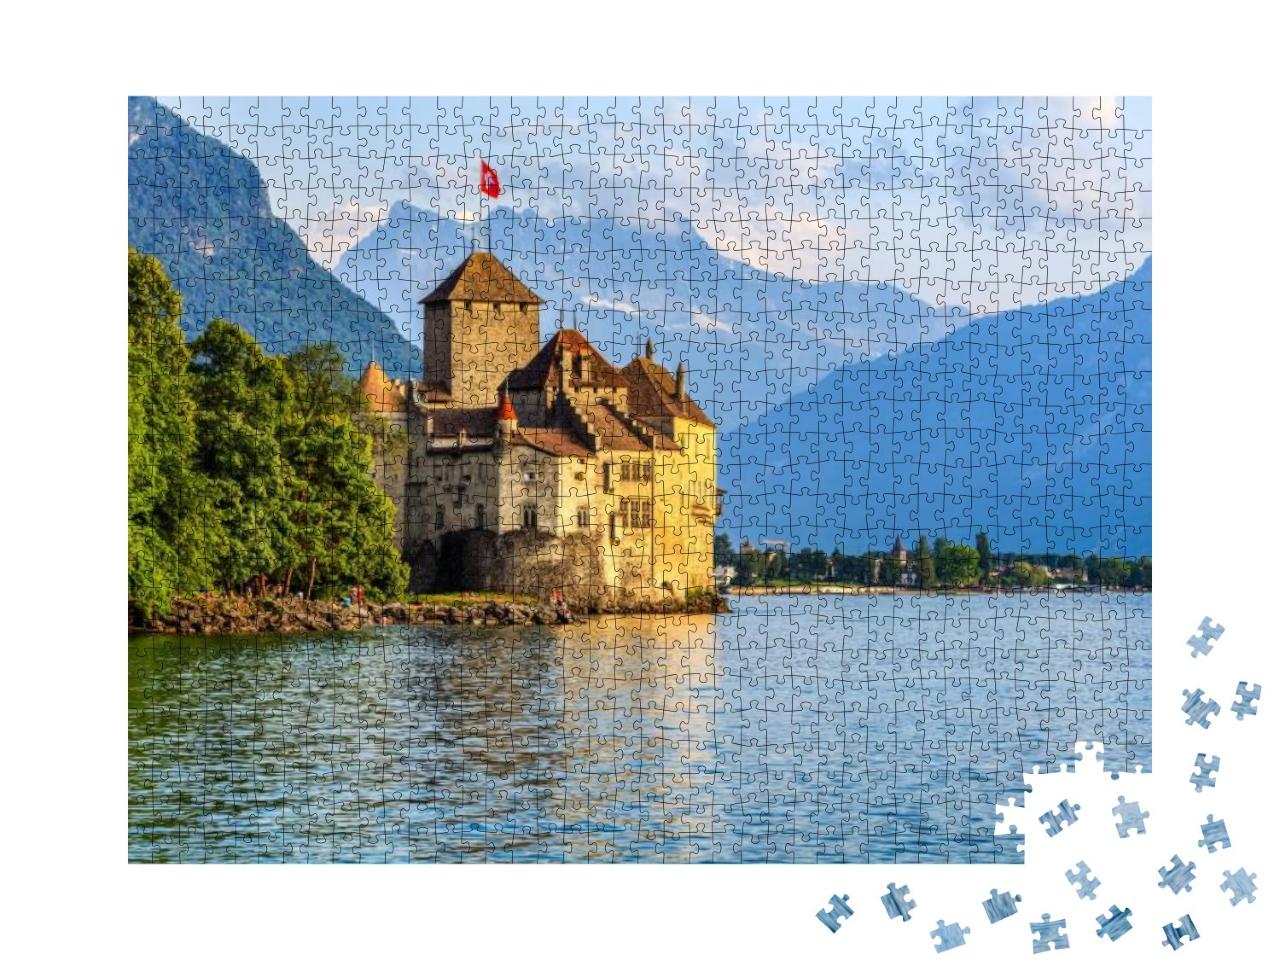 Sunset of Chillon Castle At Geneva Lake, Switzerland... Jigsaw Puzzle with 1000 pieces